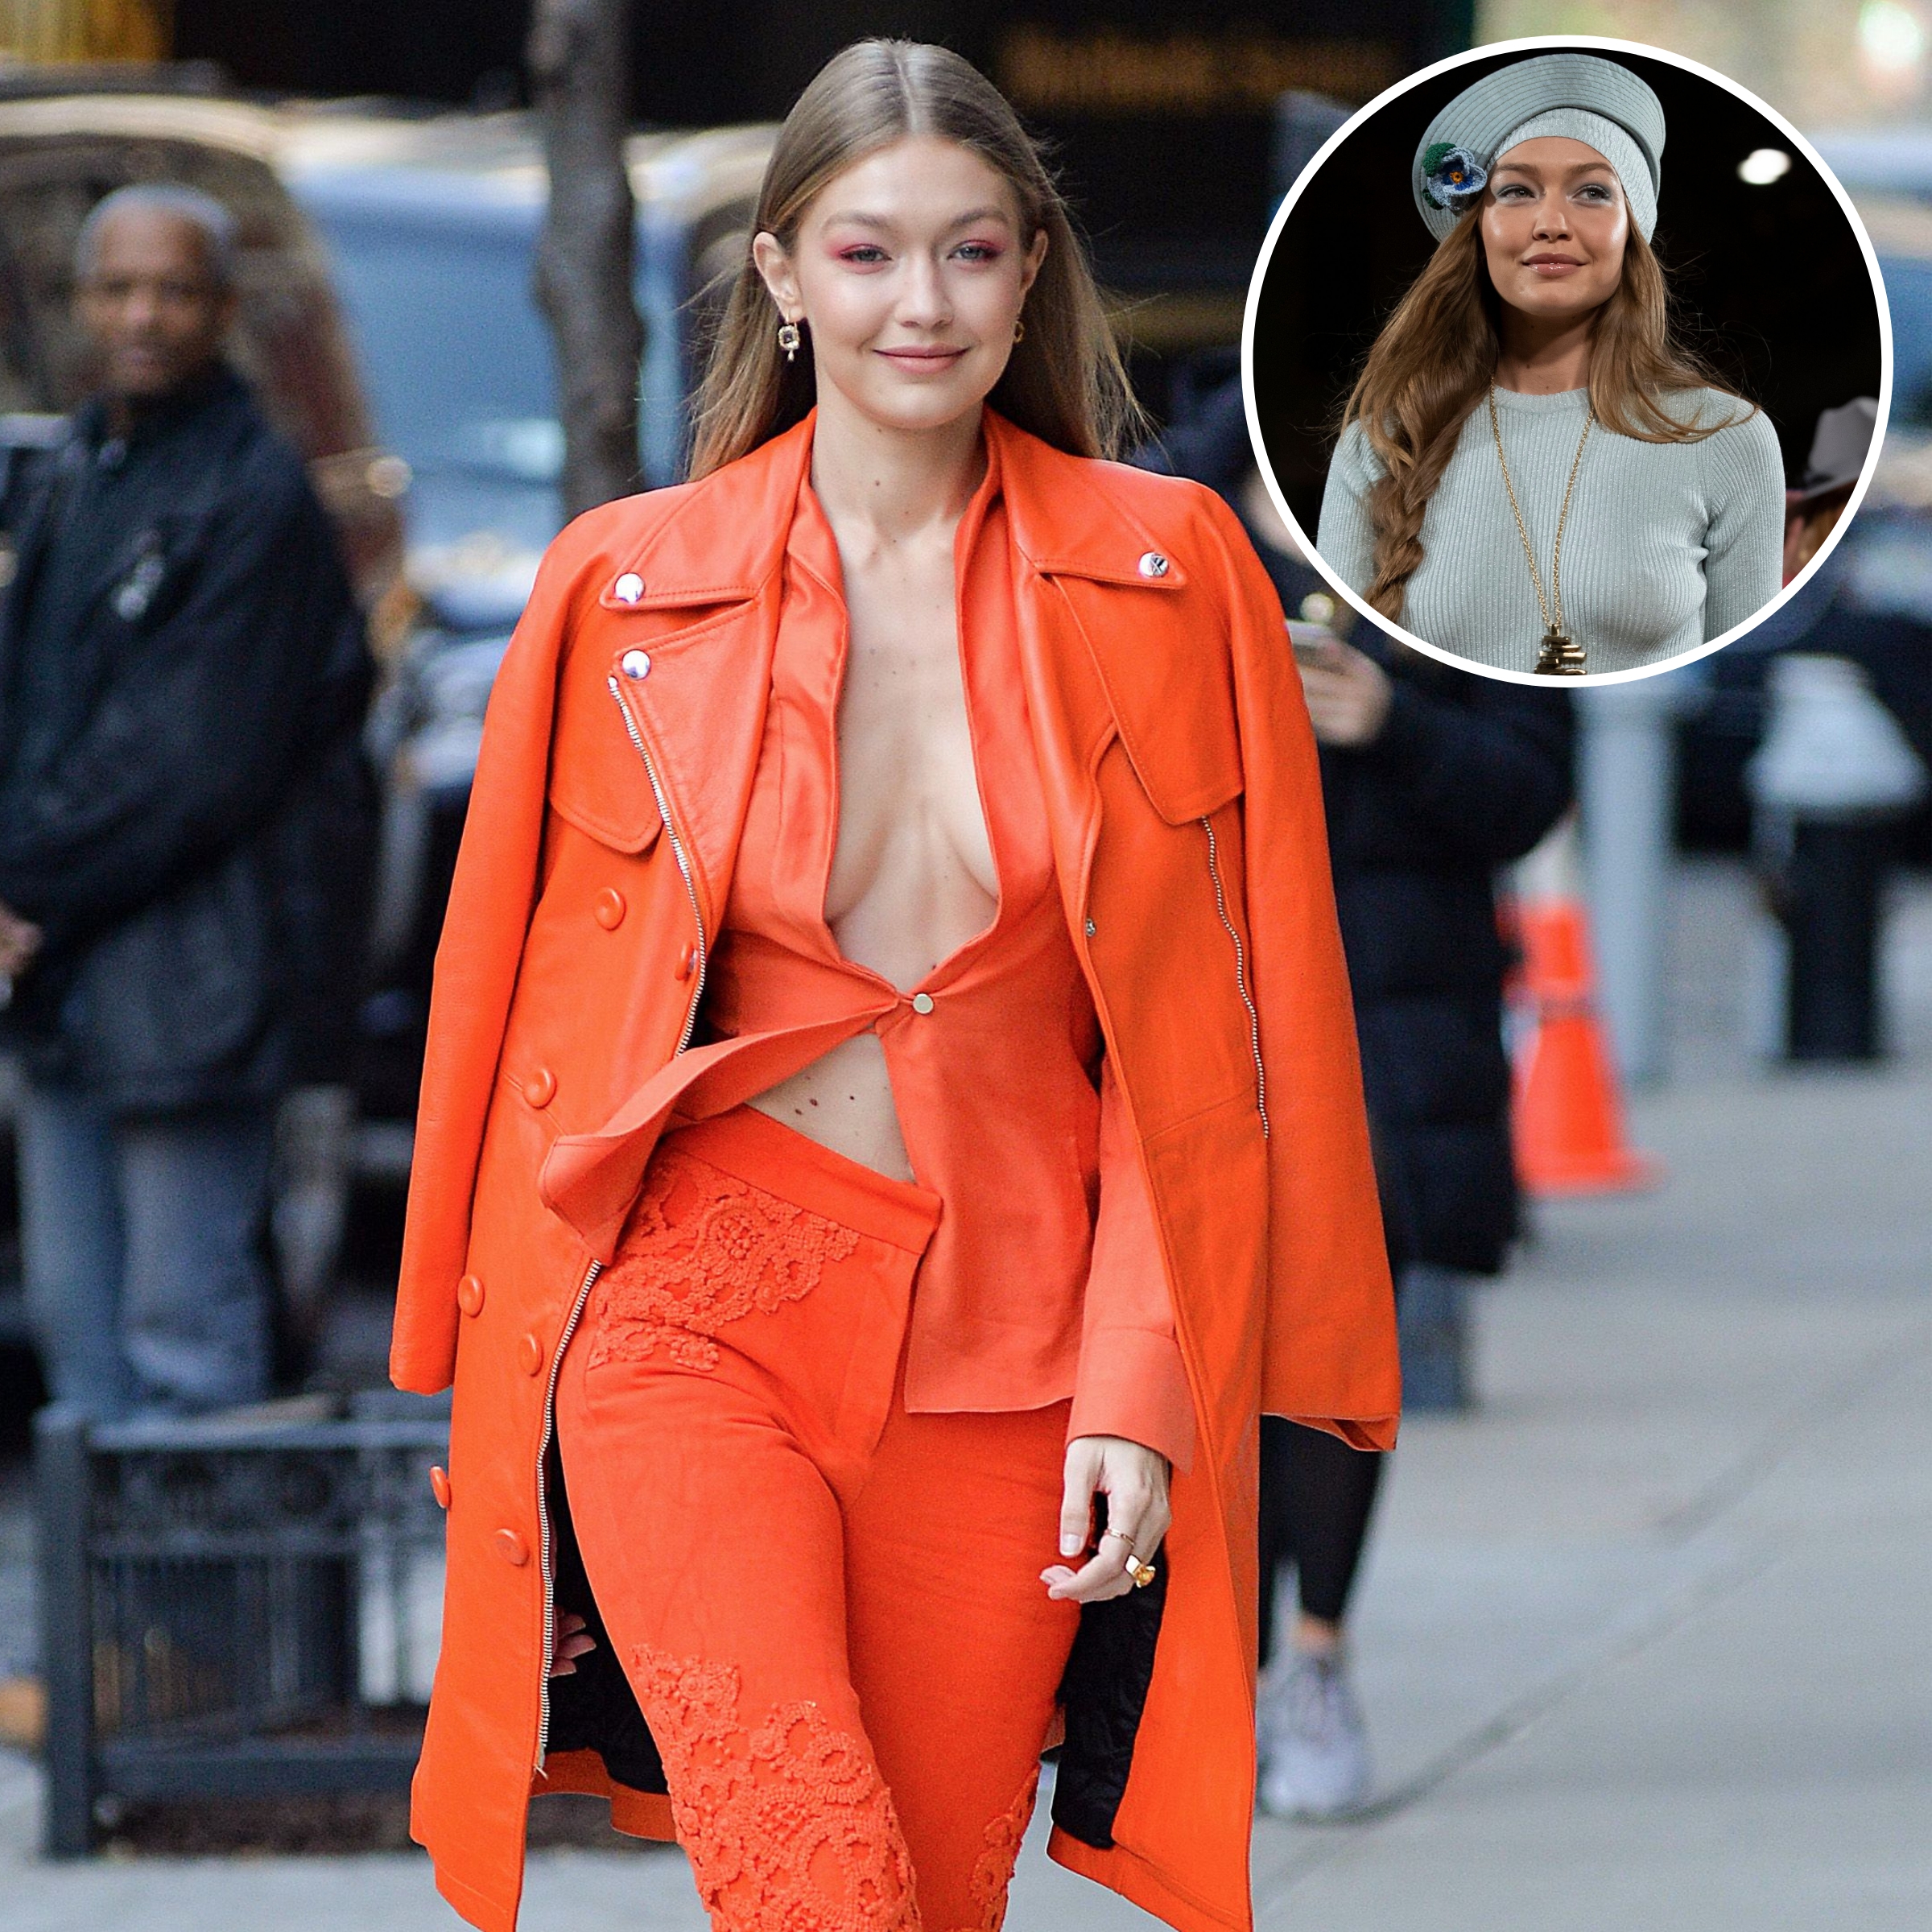 Gigi Hadid leaves her apartment and heads to 'The Tonight Show